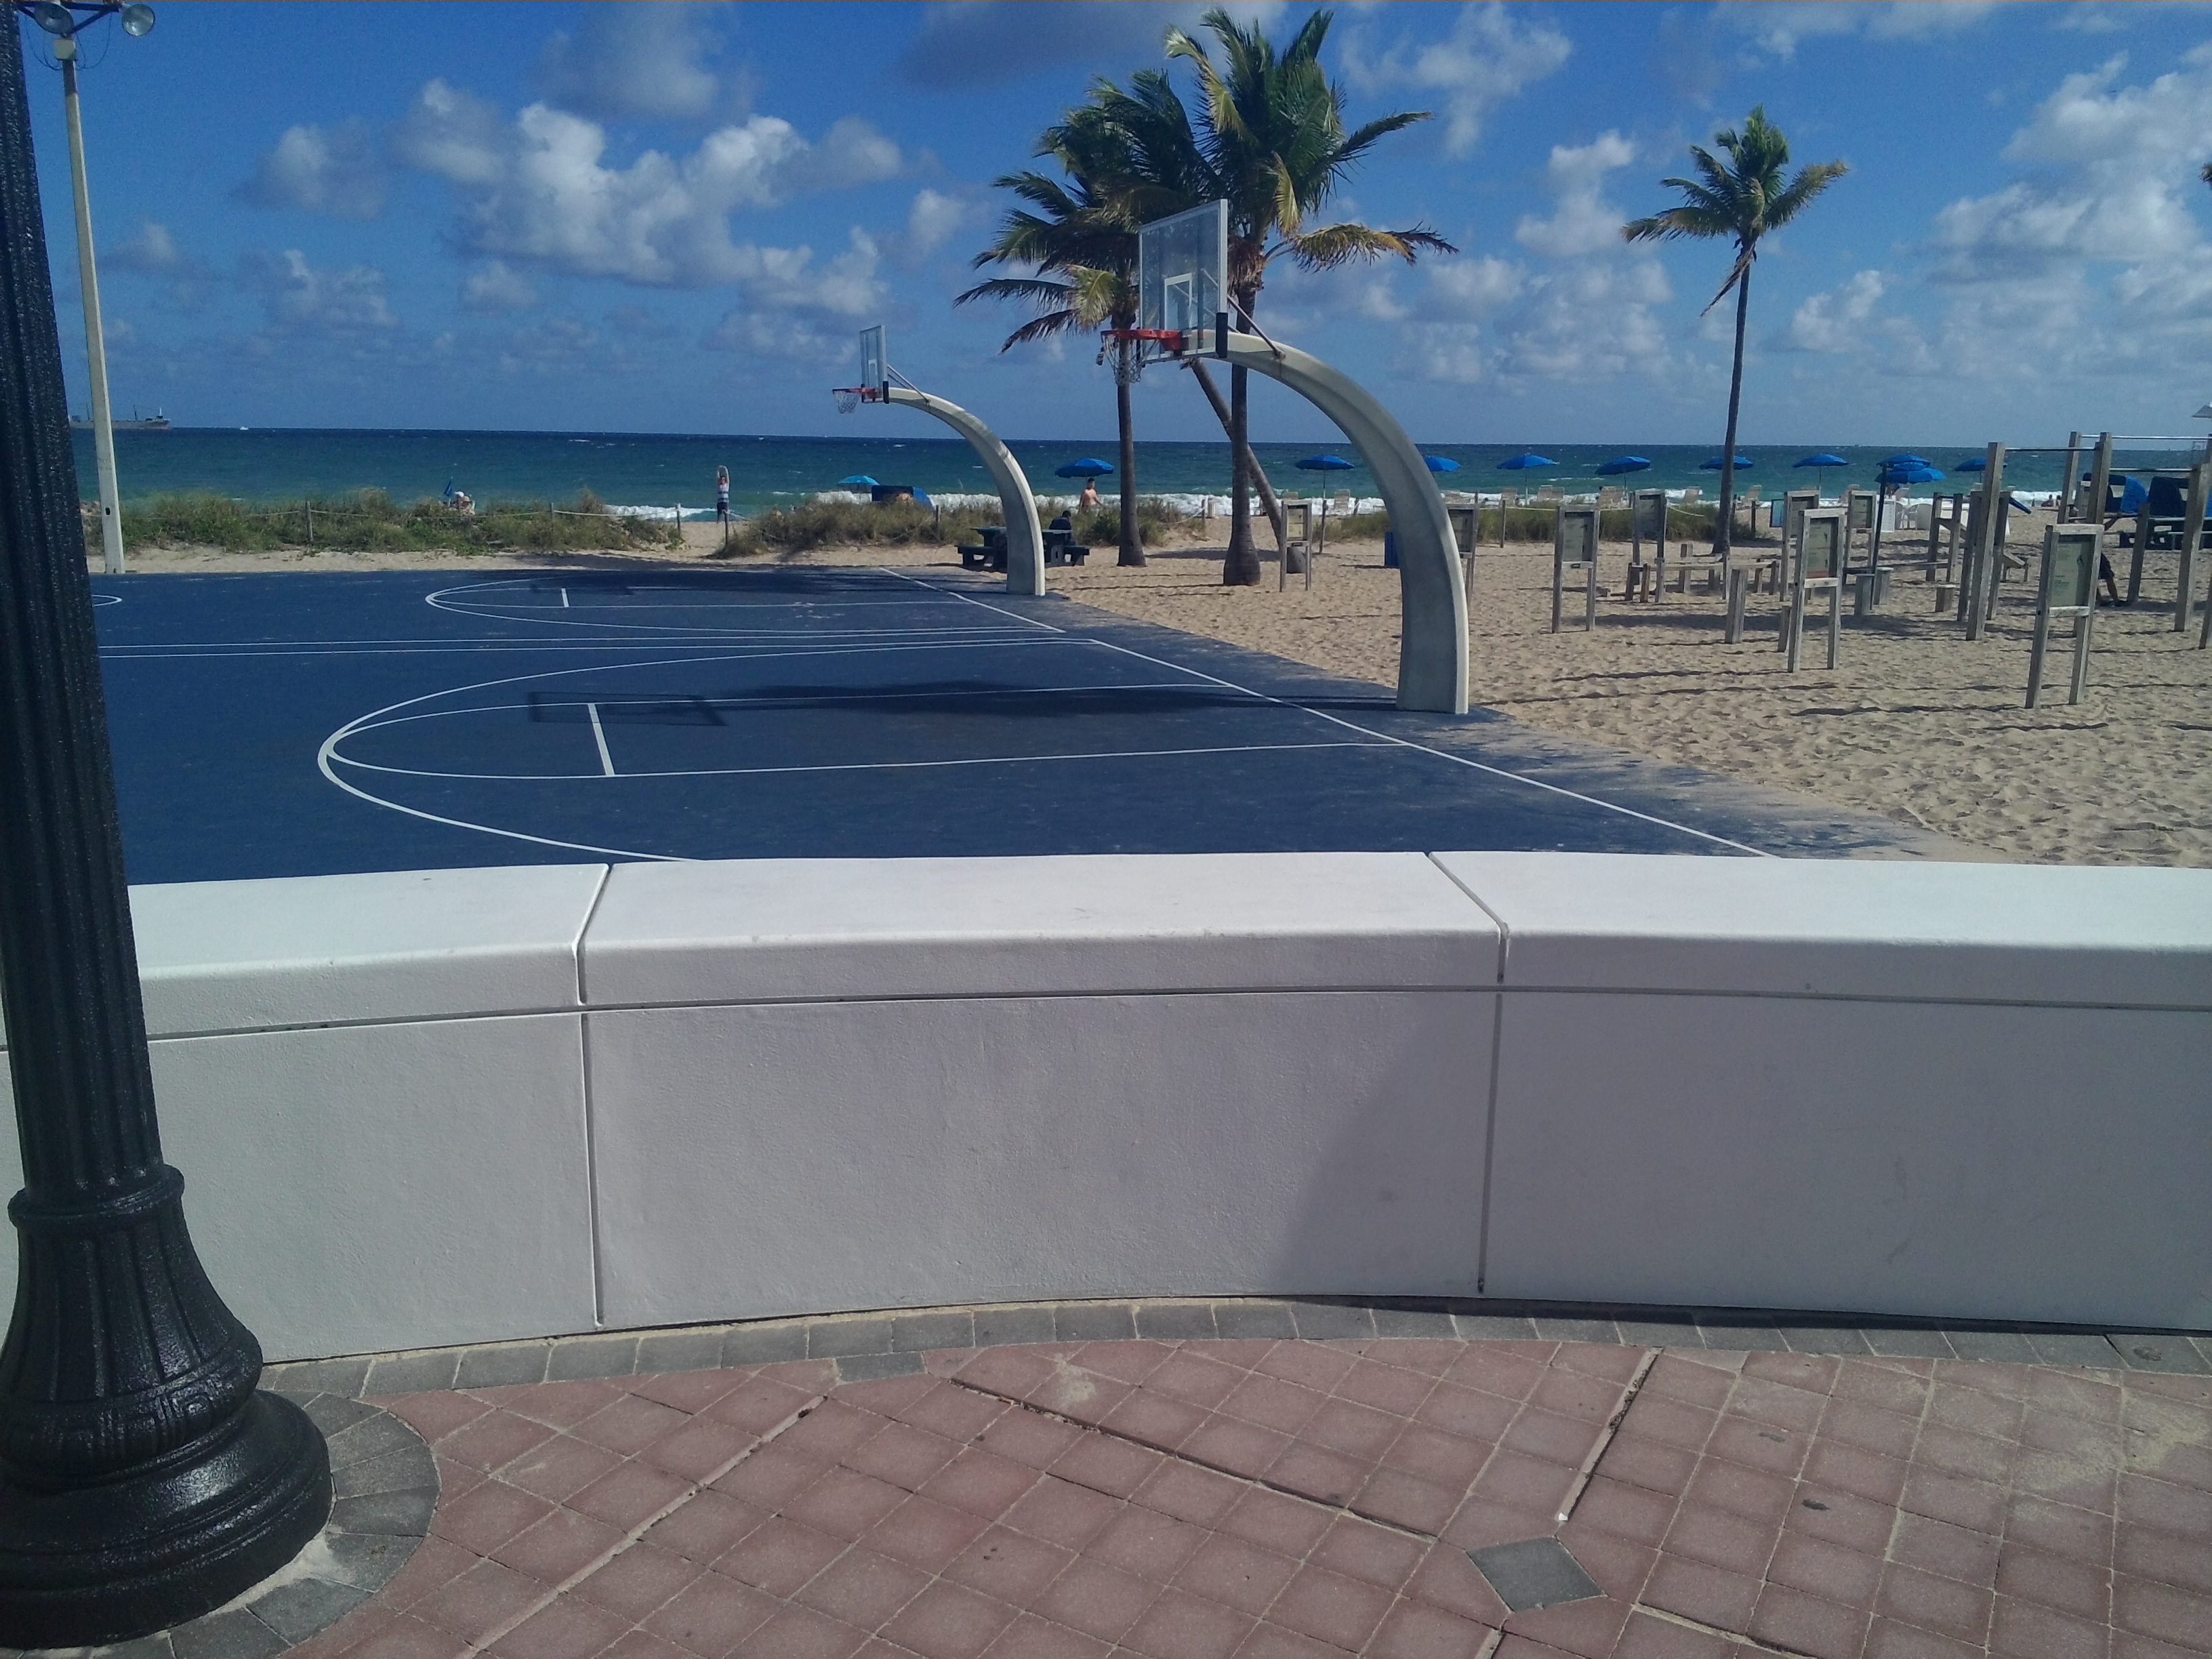 Central Beach basketball courts in Fort Lauderdale, FL